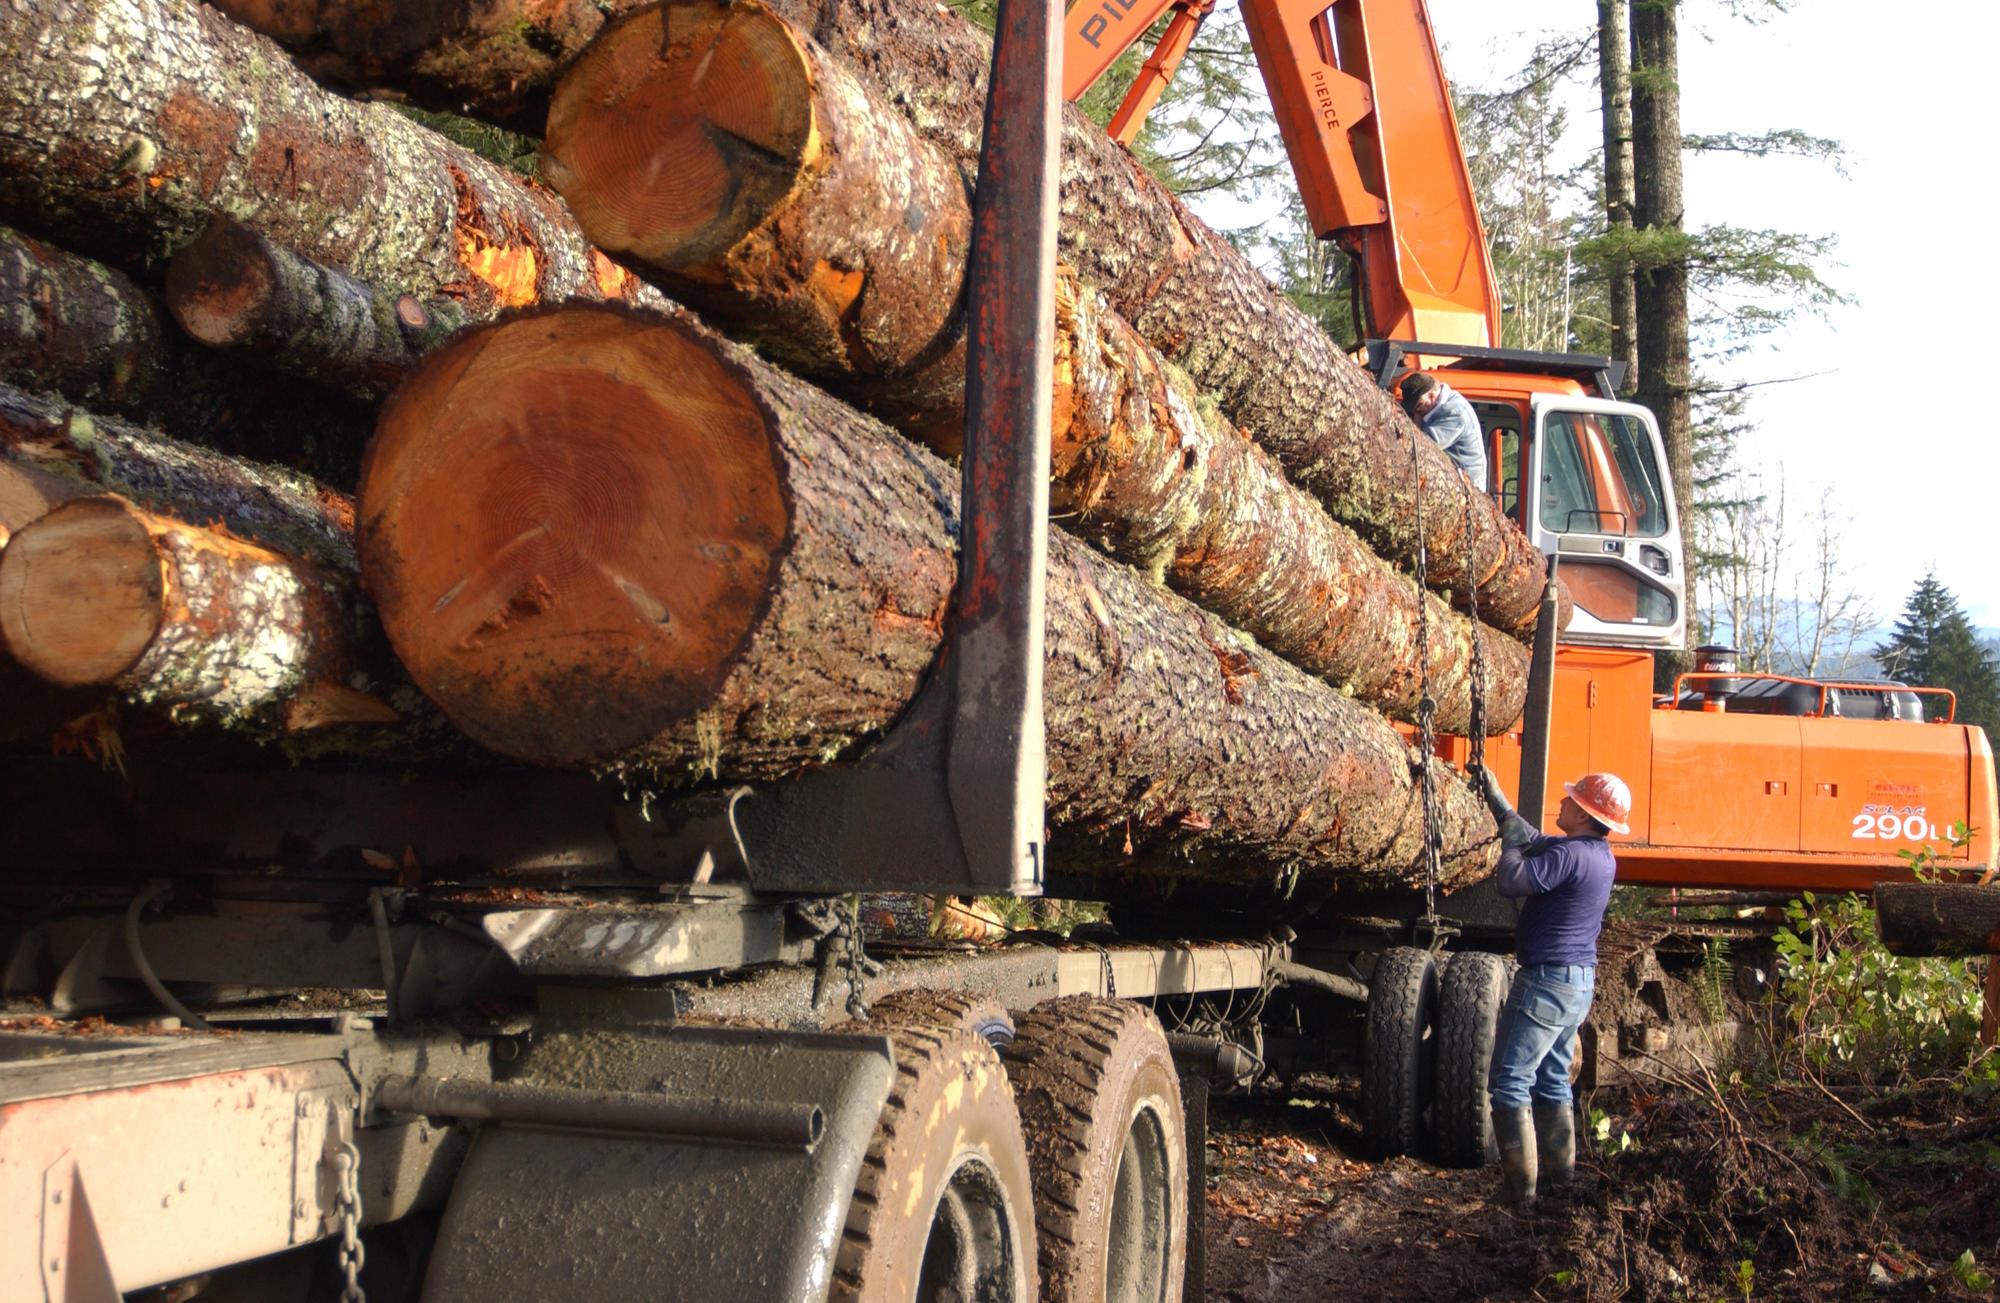 A man tightens a chain on a load of logs on trailer.